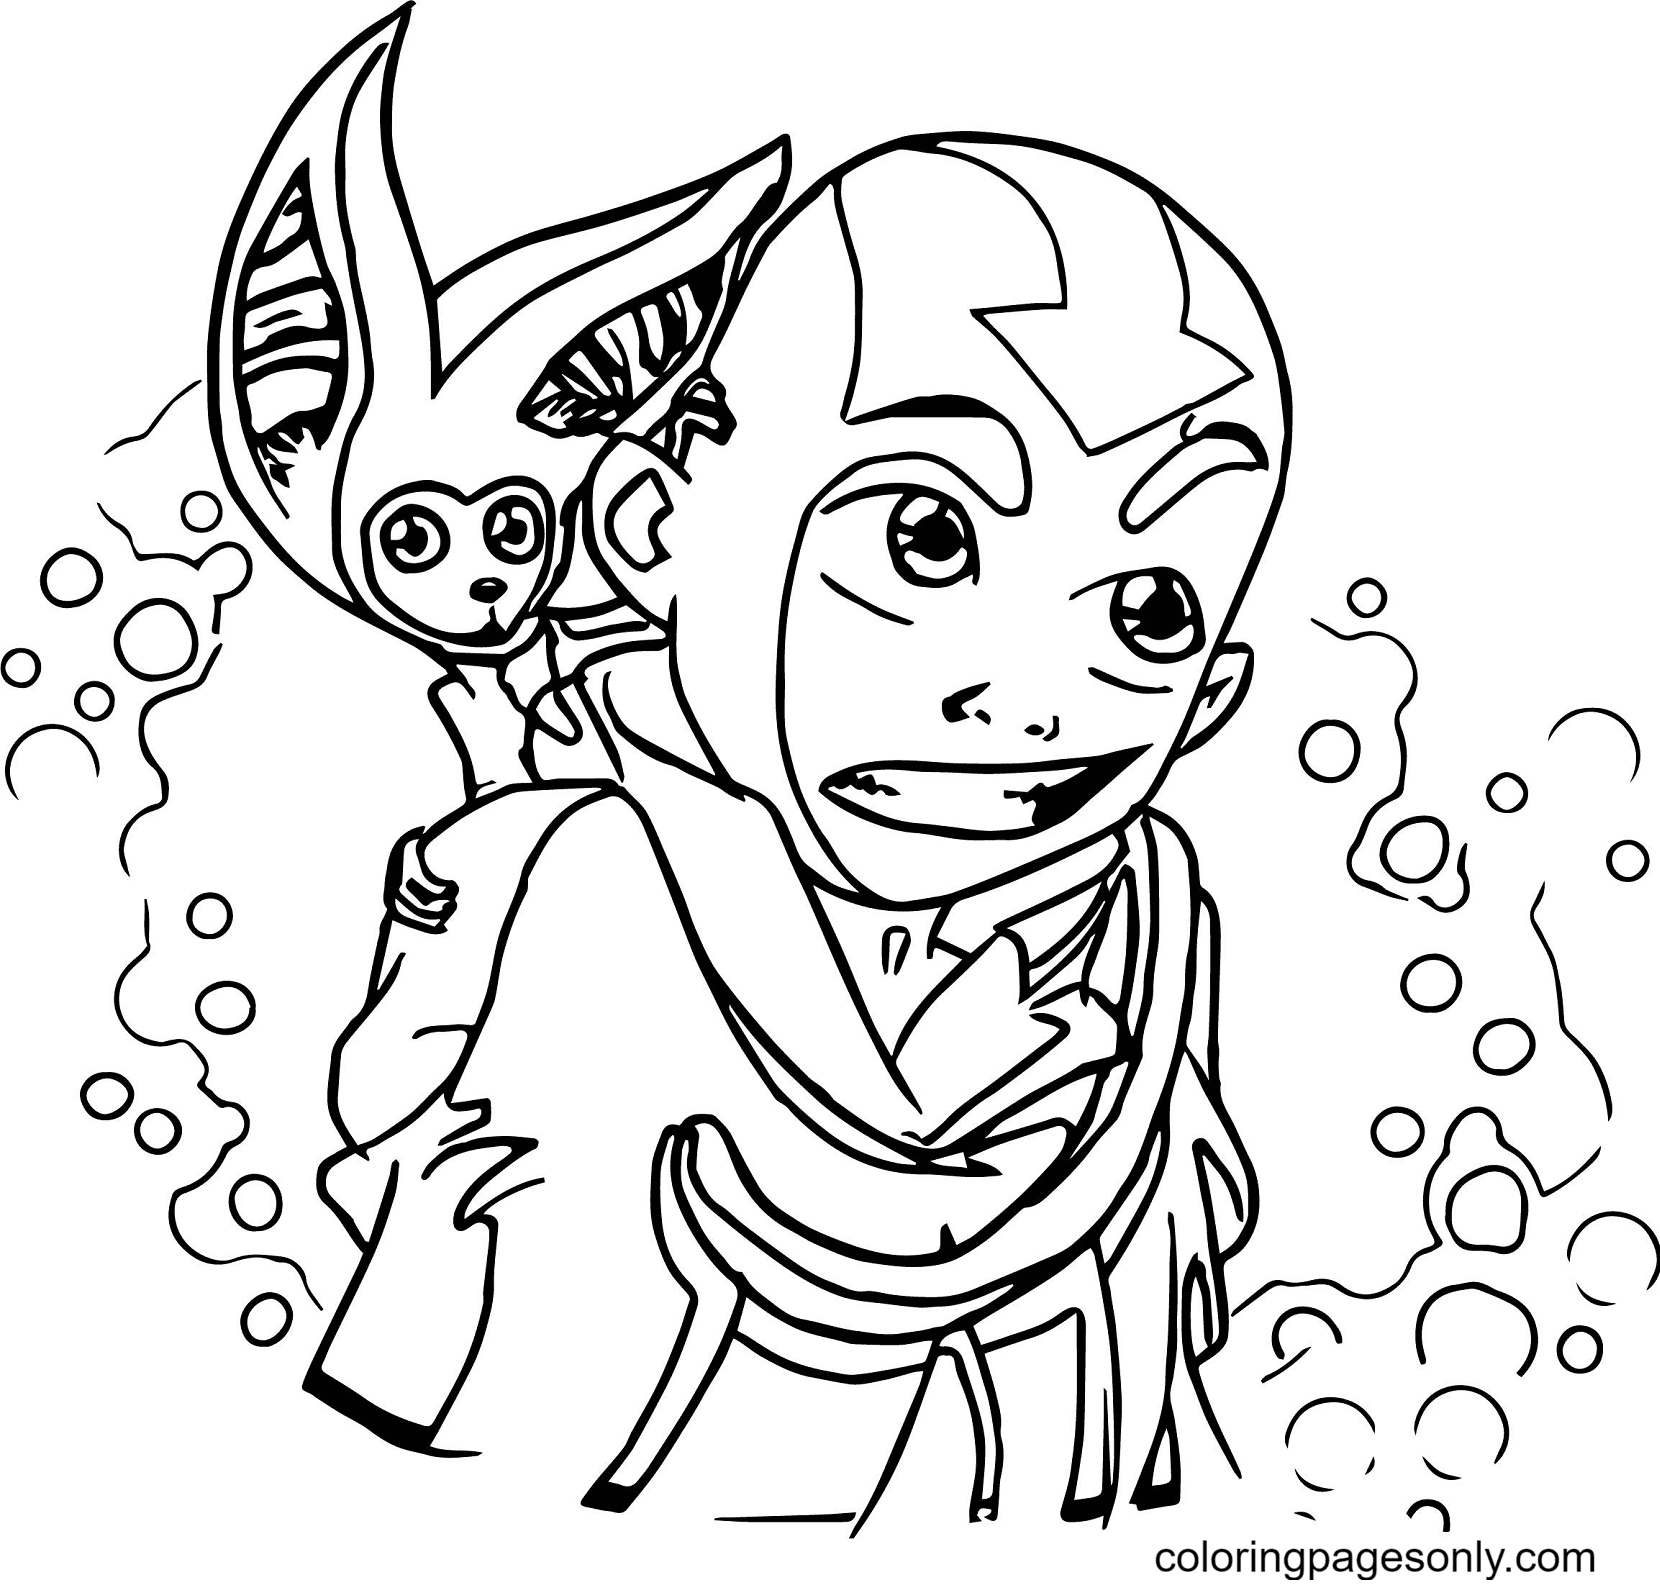 Aang And Momo from Avatar Coloring Page